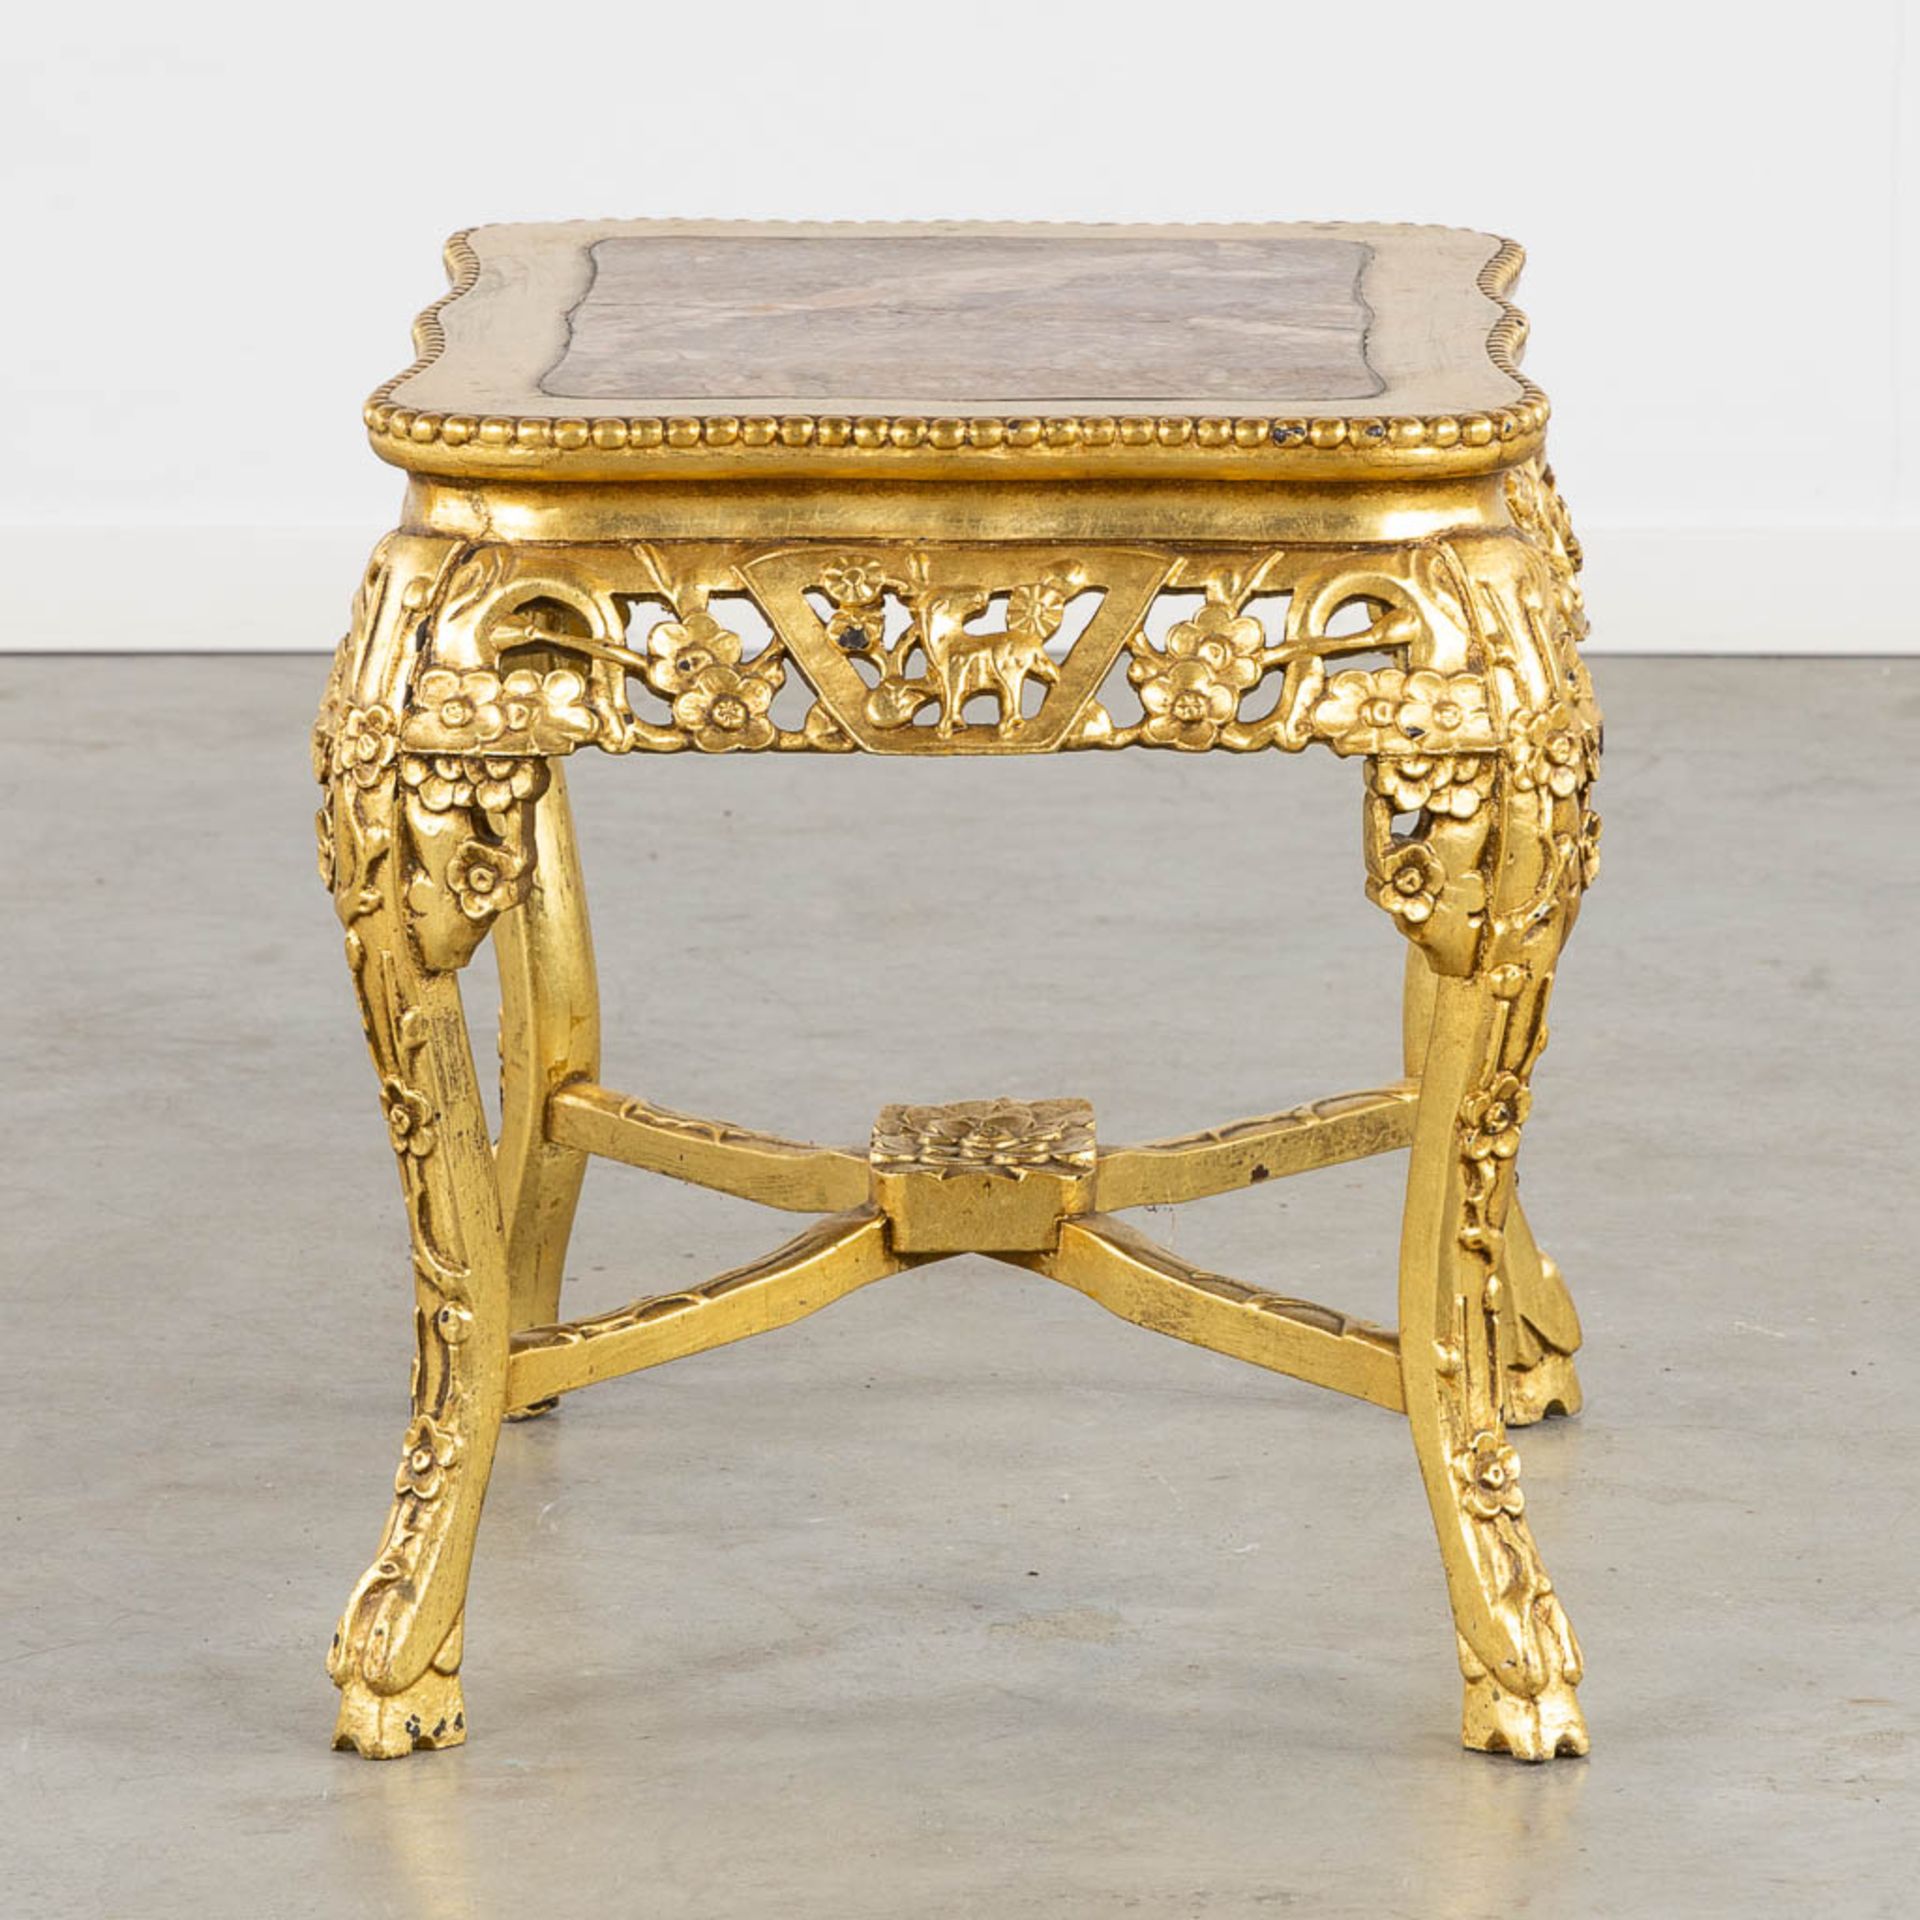 An oriental style side table, gilt wood with a marble top. (L:46 x W:52 x H:48 cm) - Bild 4 aus 12